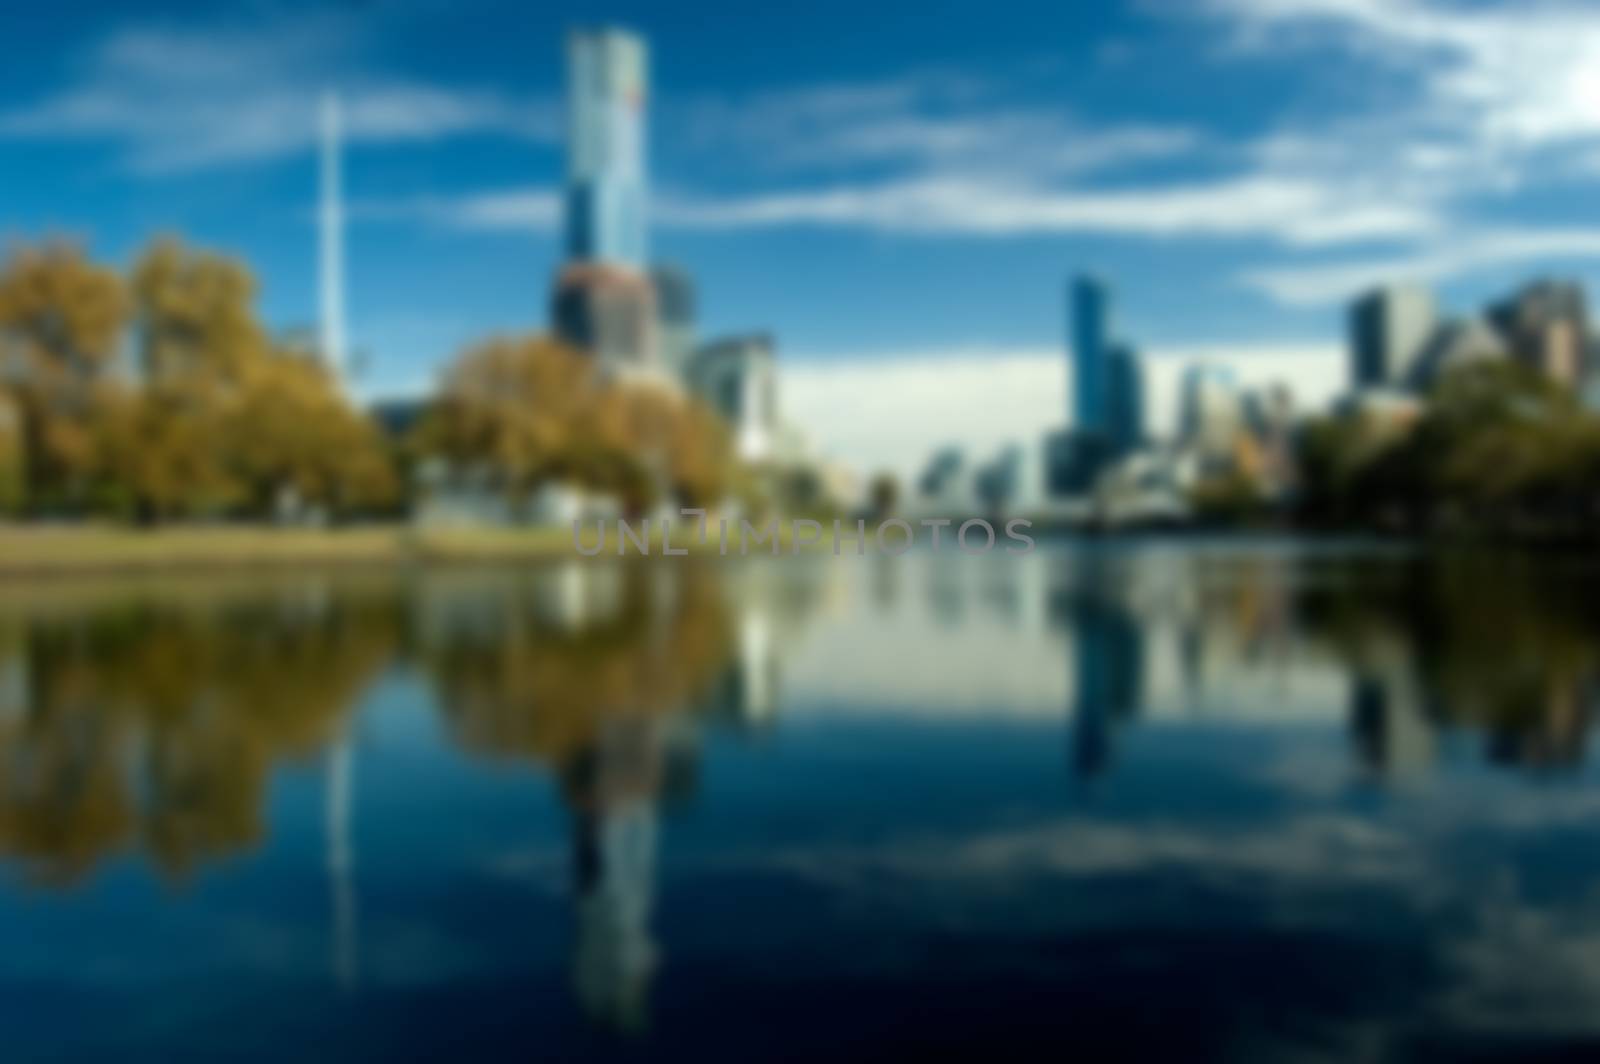 Blurred City Skyline (Melbourne) by head-off